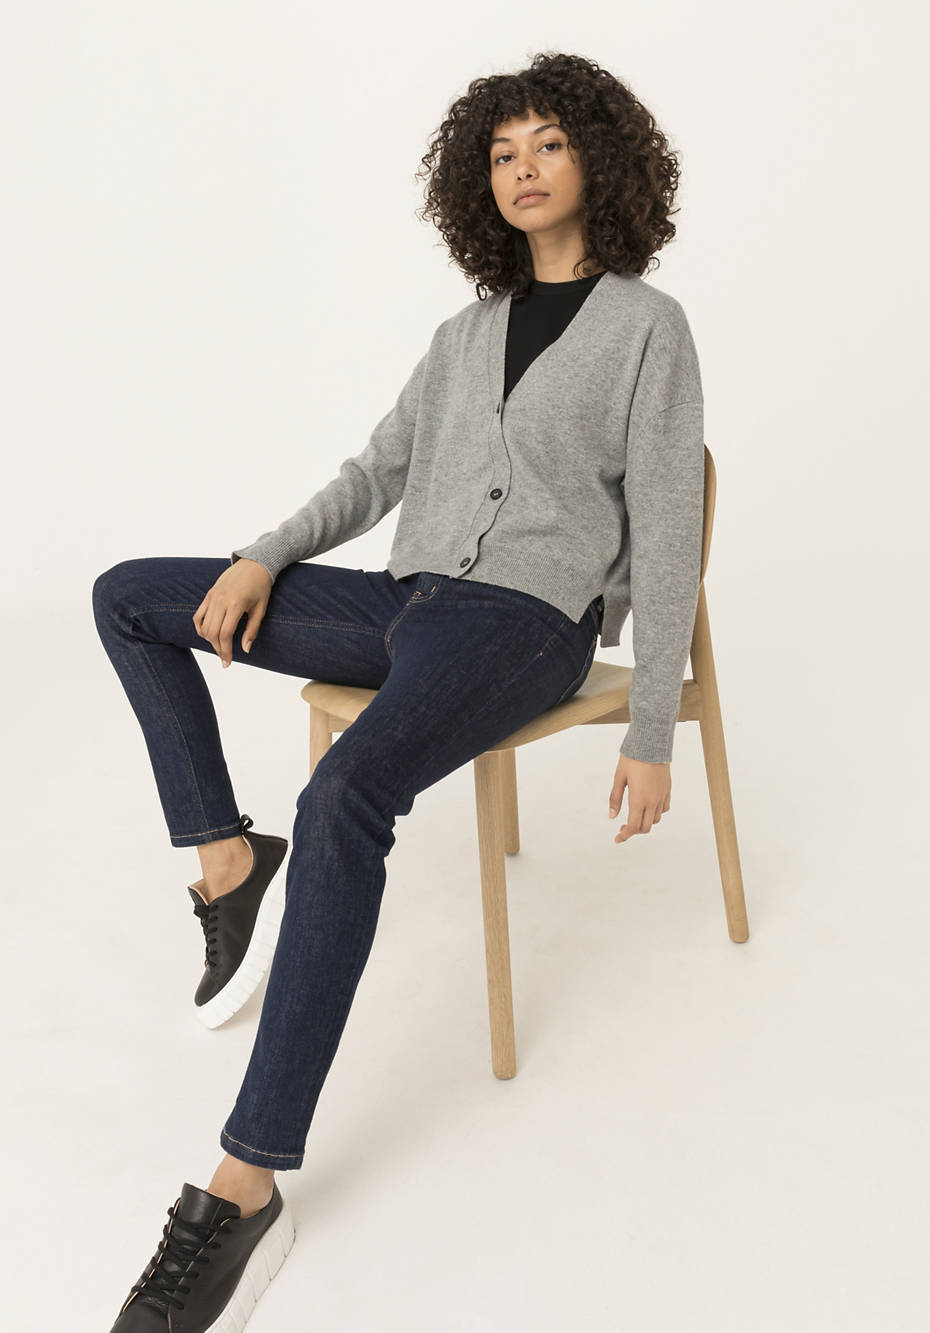 Cardigan made of organic virgin wool with cashmere